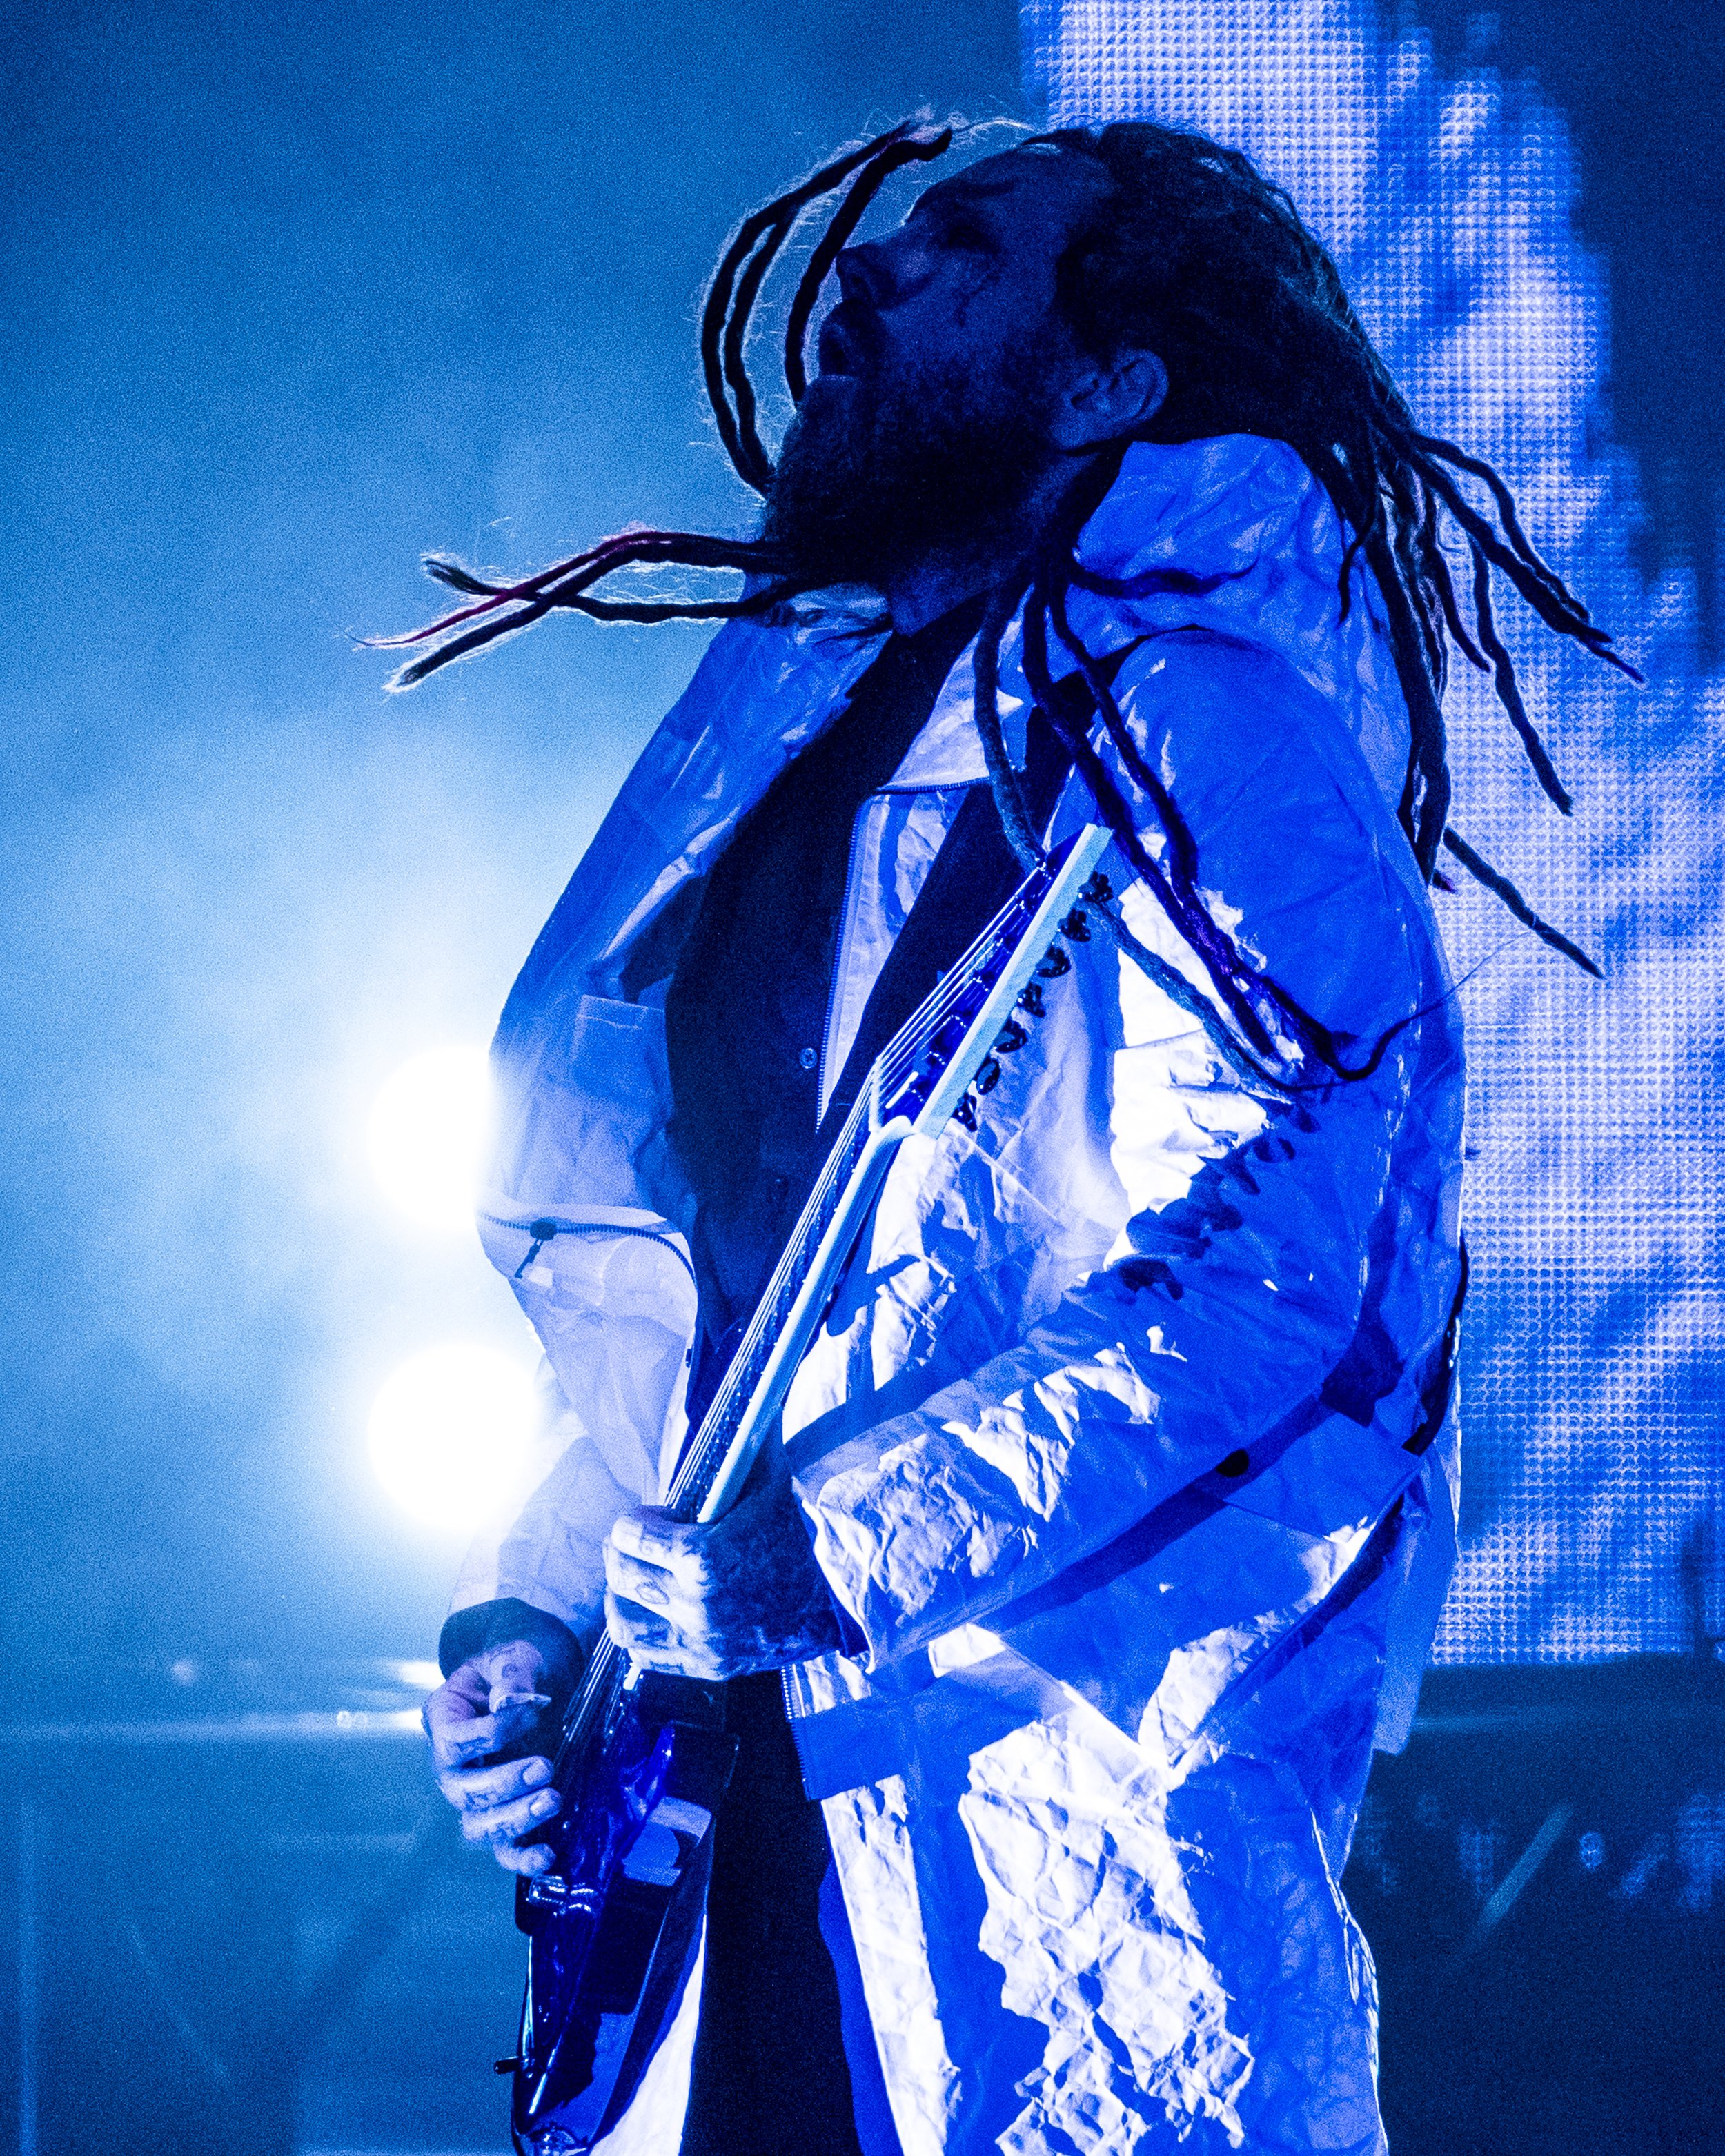 KORN - 2022 NORTH AMERICAN TOUR - Ball Arena - Denver, Colorado - Tuesday, August 16, 2022 - PHOTO BY Mowgli Miles of Interracial Friends - PHOTO BY Mowgli Miles of Interracial Friends-139.JPG